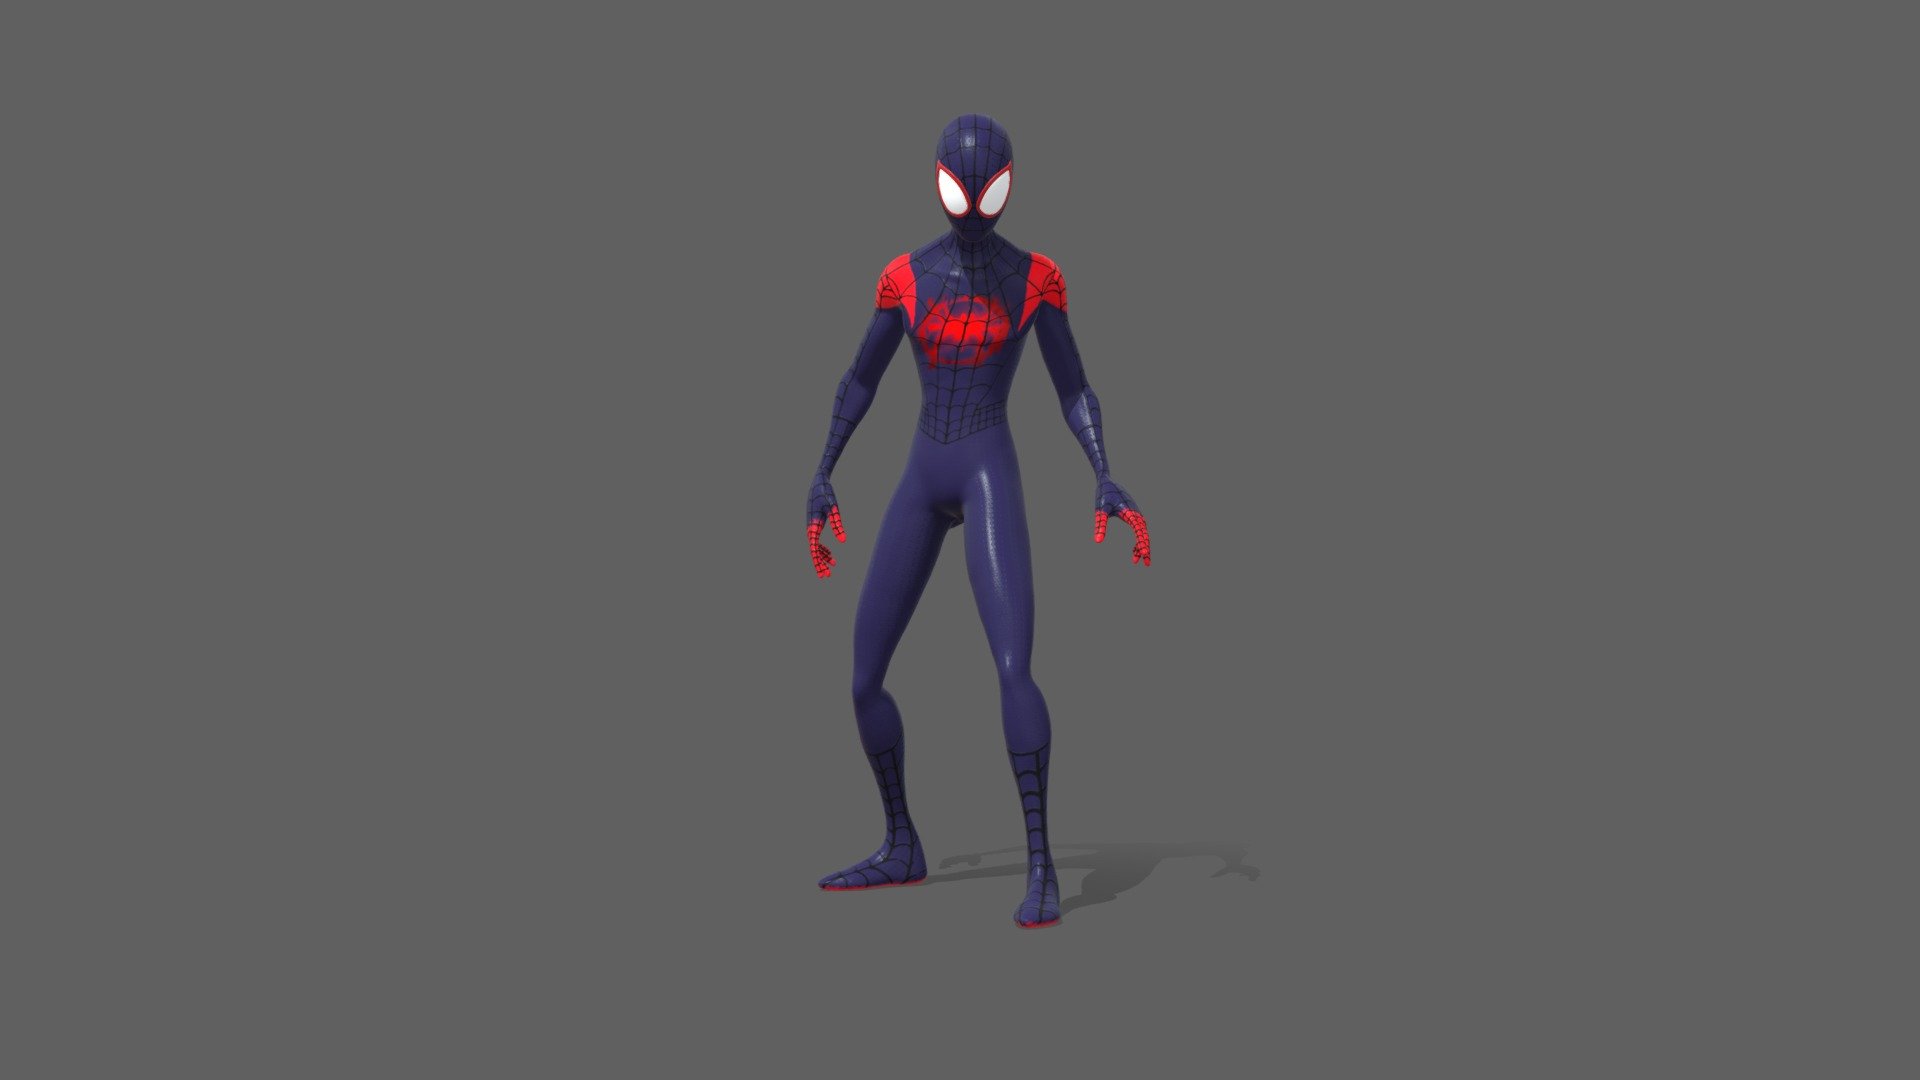 This is my take of Spiderman Miles Morales from the movie Into The Spiderverse - Spiderman Miles Morales - 3D model by Soliaris 3d model